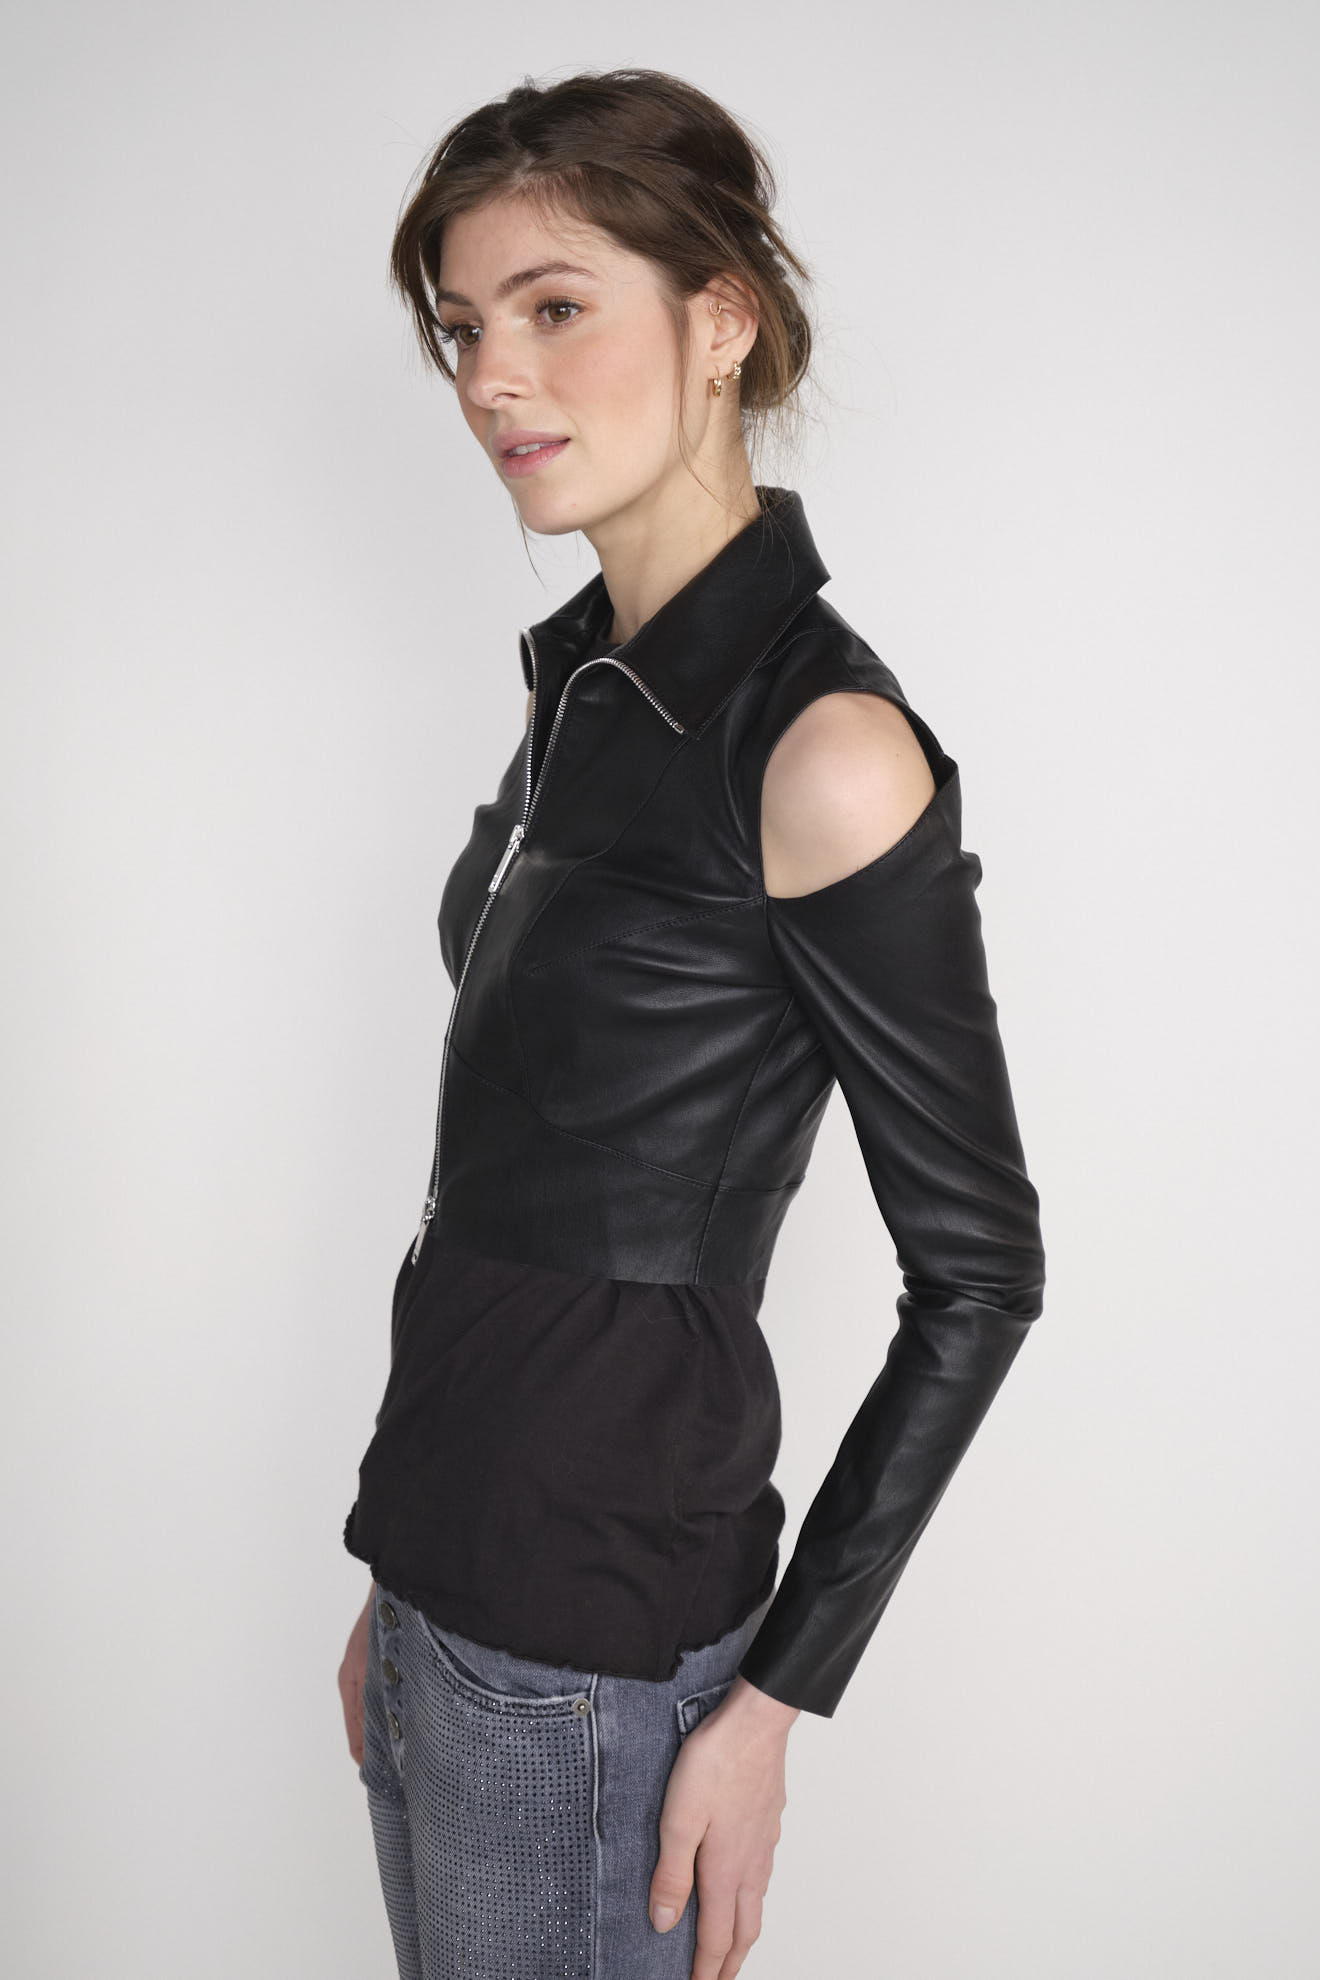 jitrois Nadia - leather jacket with cut-outs black 36